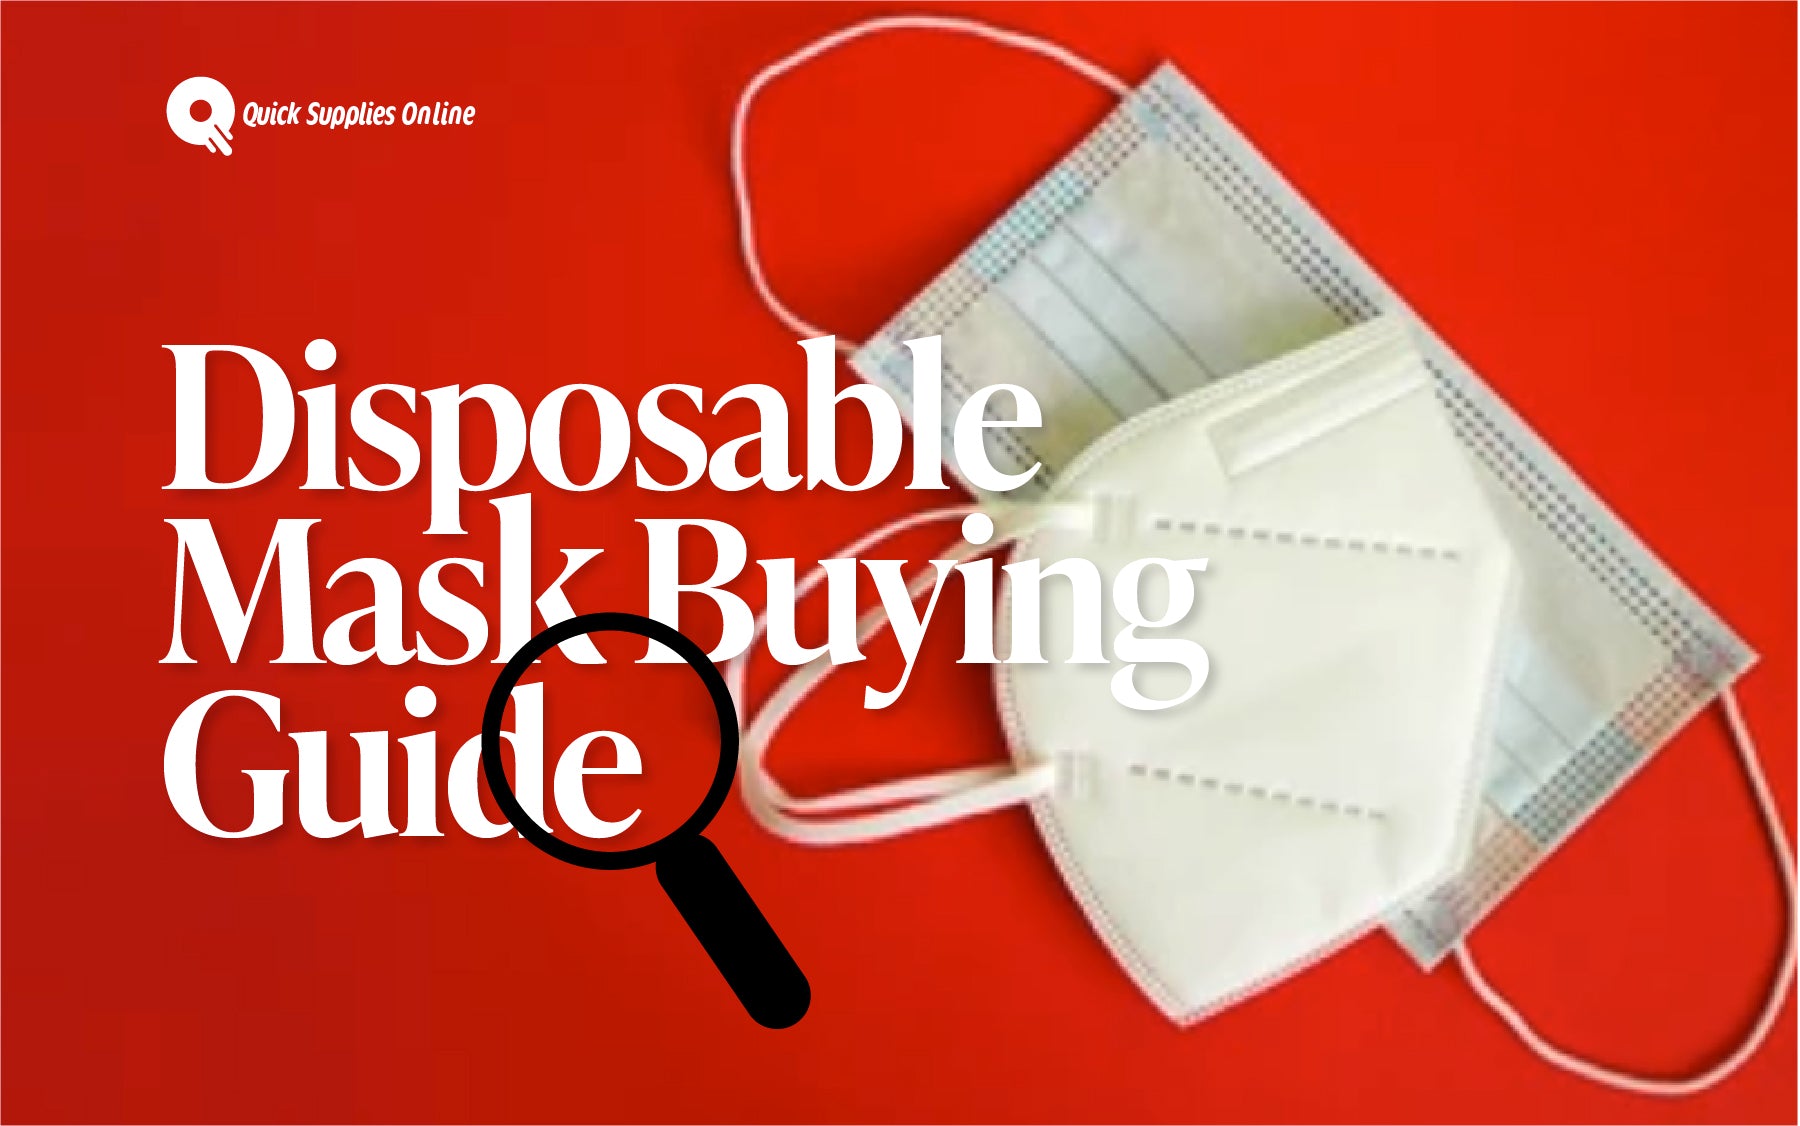 Disposable Mask Buying Guide